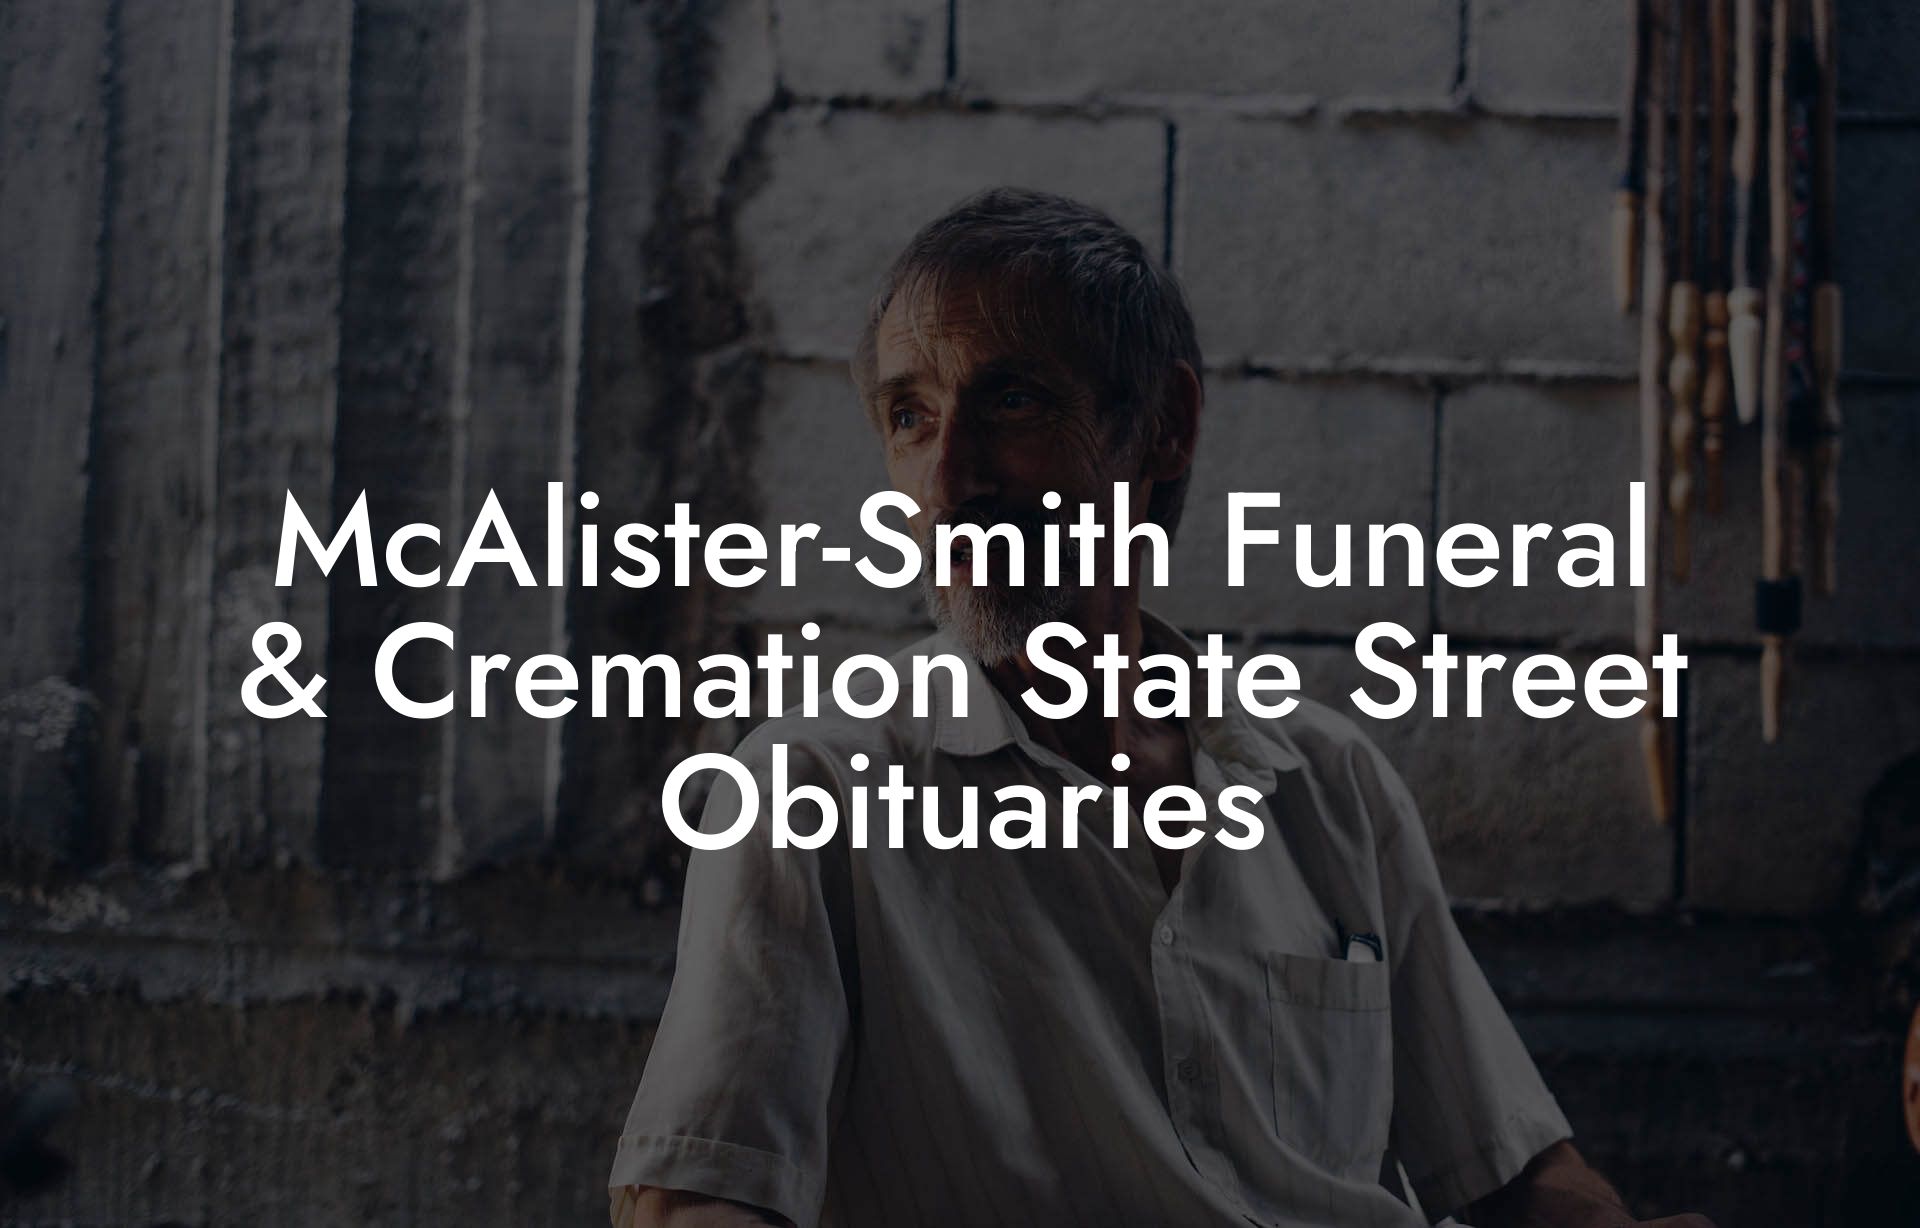 McAlister-Smith Funeral & Cremation State Street Obituaries